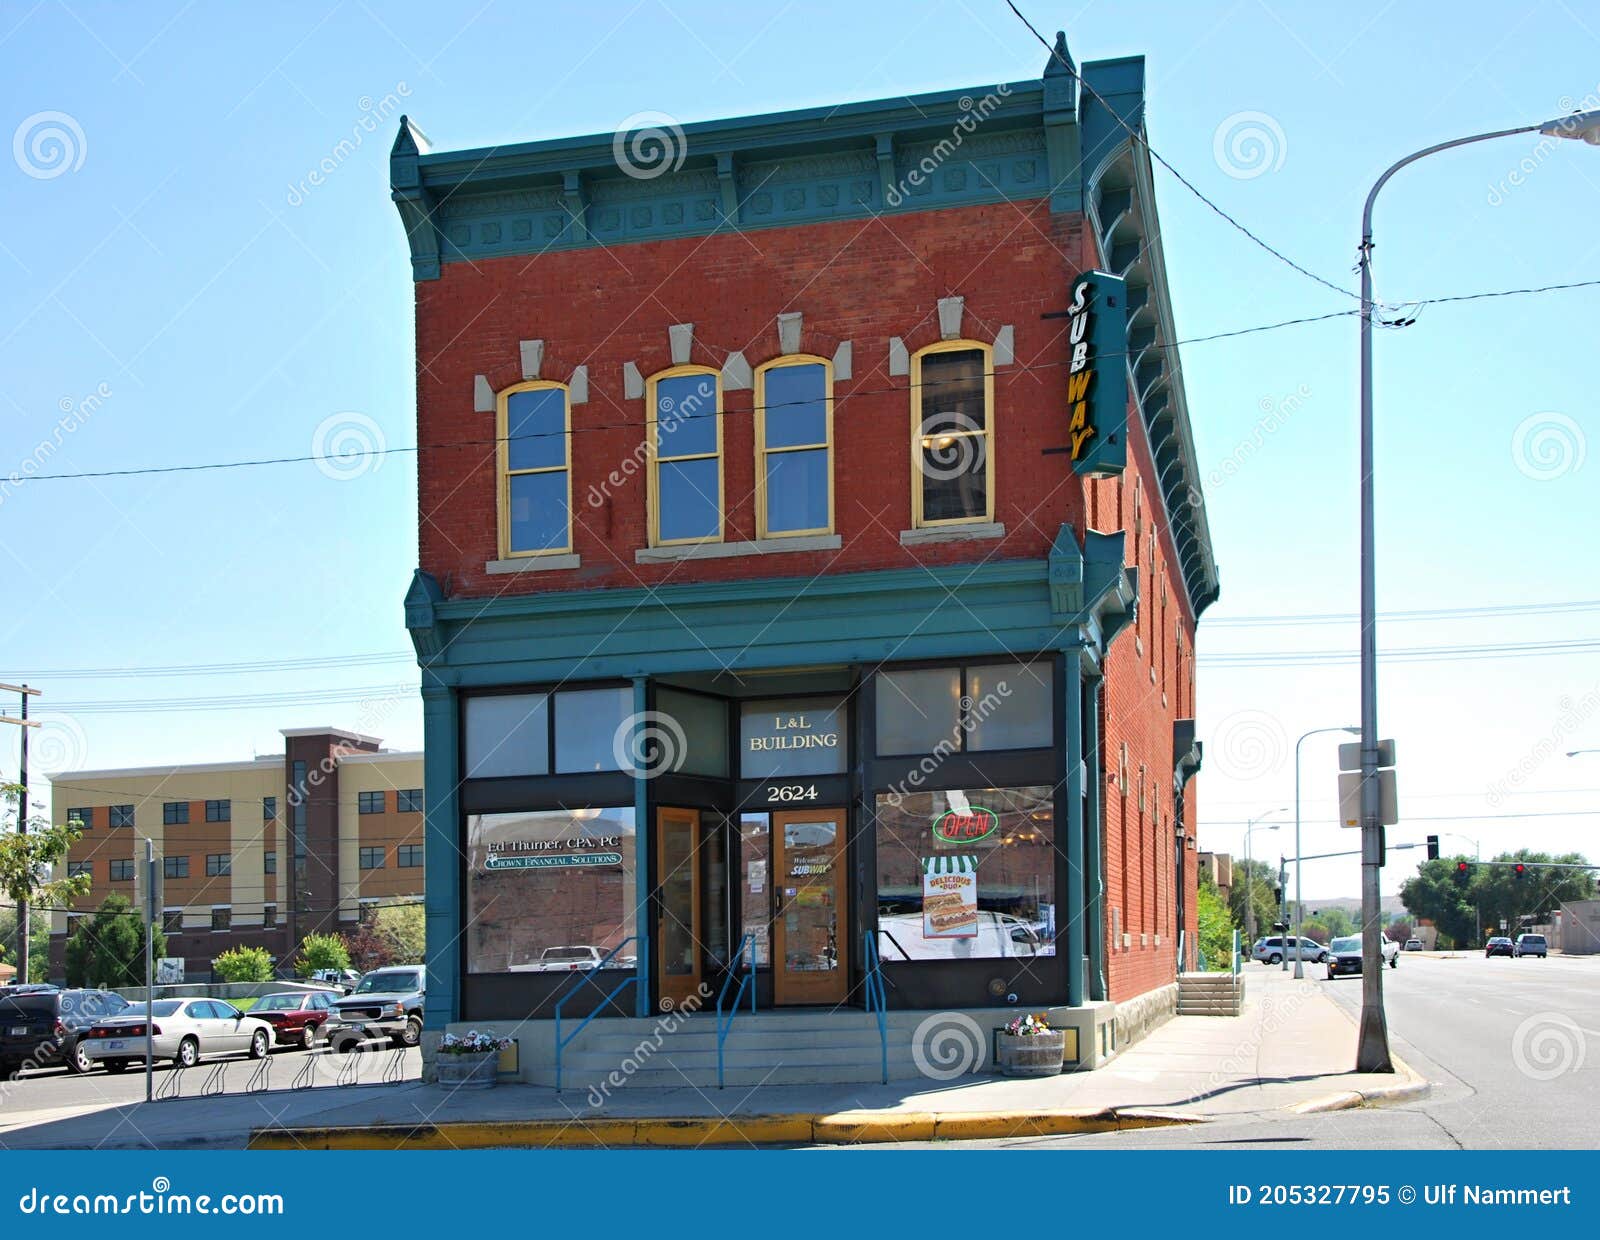 historical buildings in the old western town of billings, montana